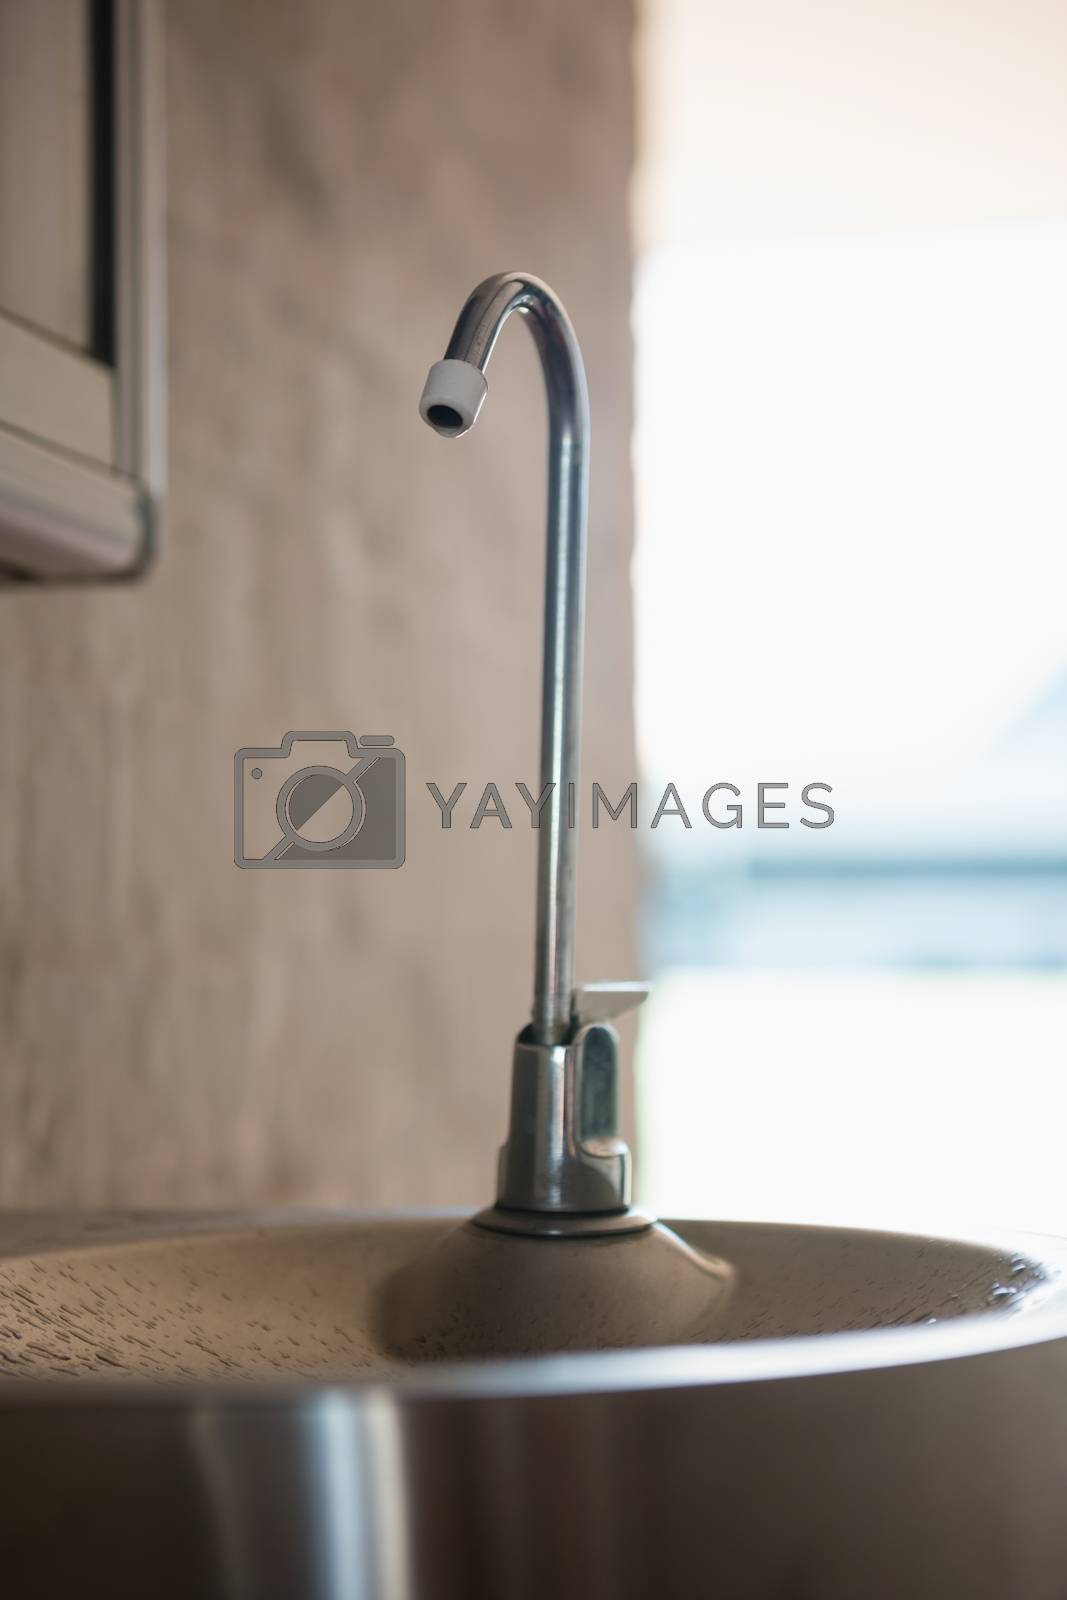 Royalty free image of Close up of faucet on sink by Wavebreakmedia